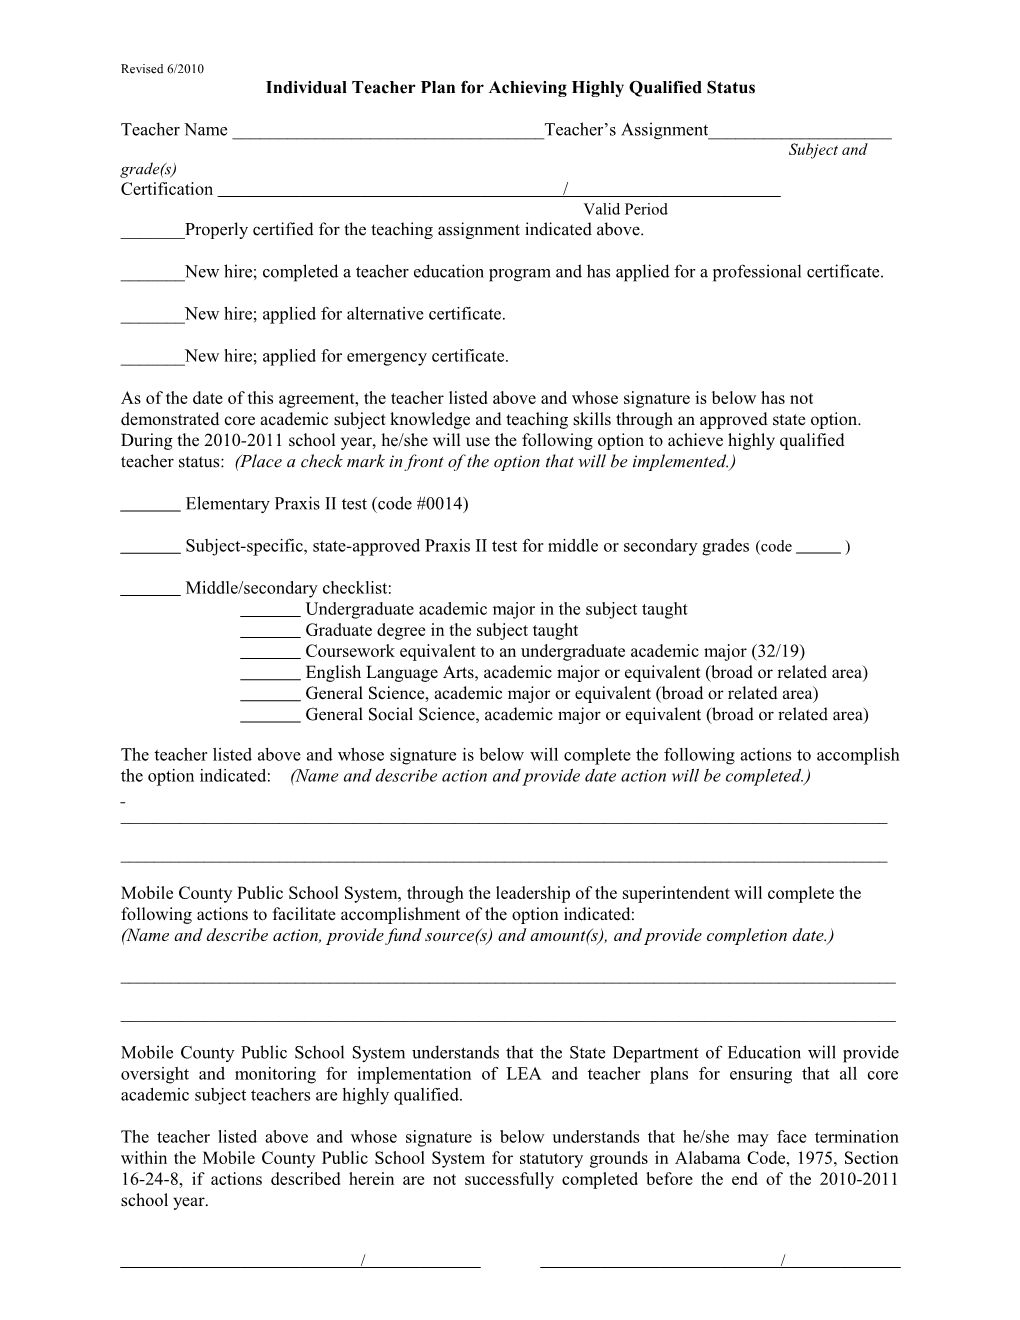 Individual Teacher Plan For Achieving Highly Qualified Status